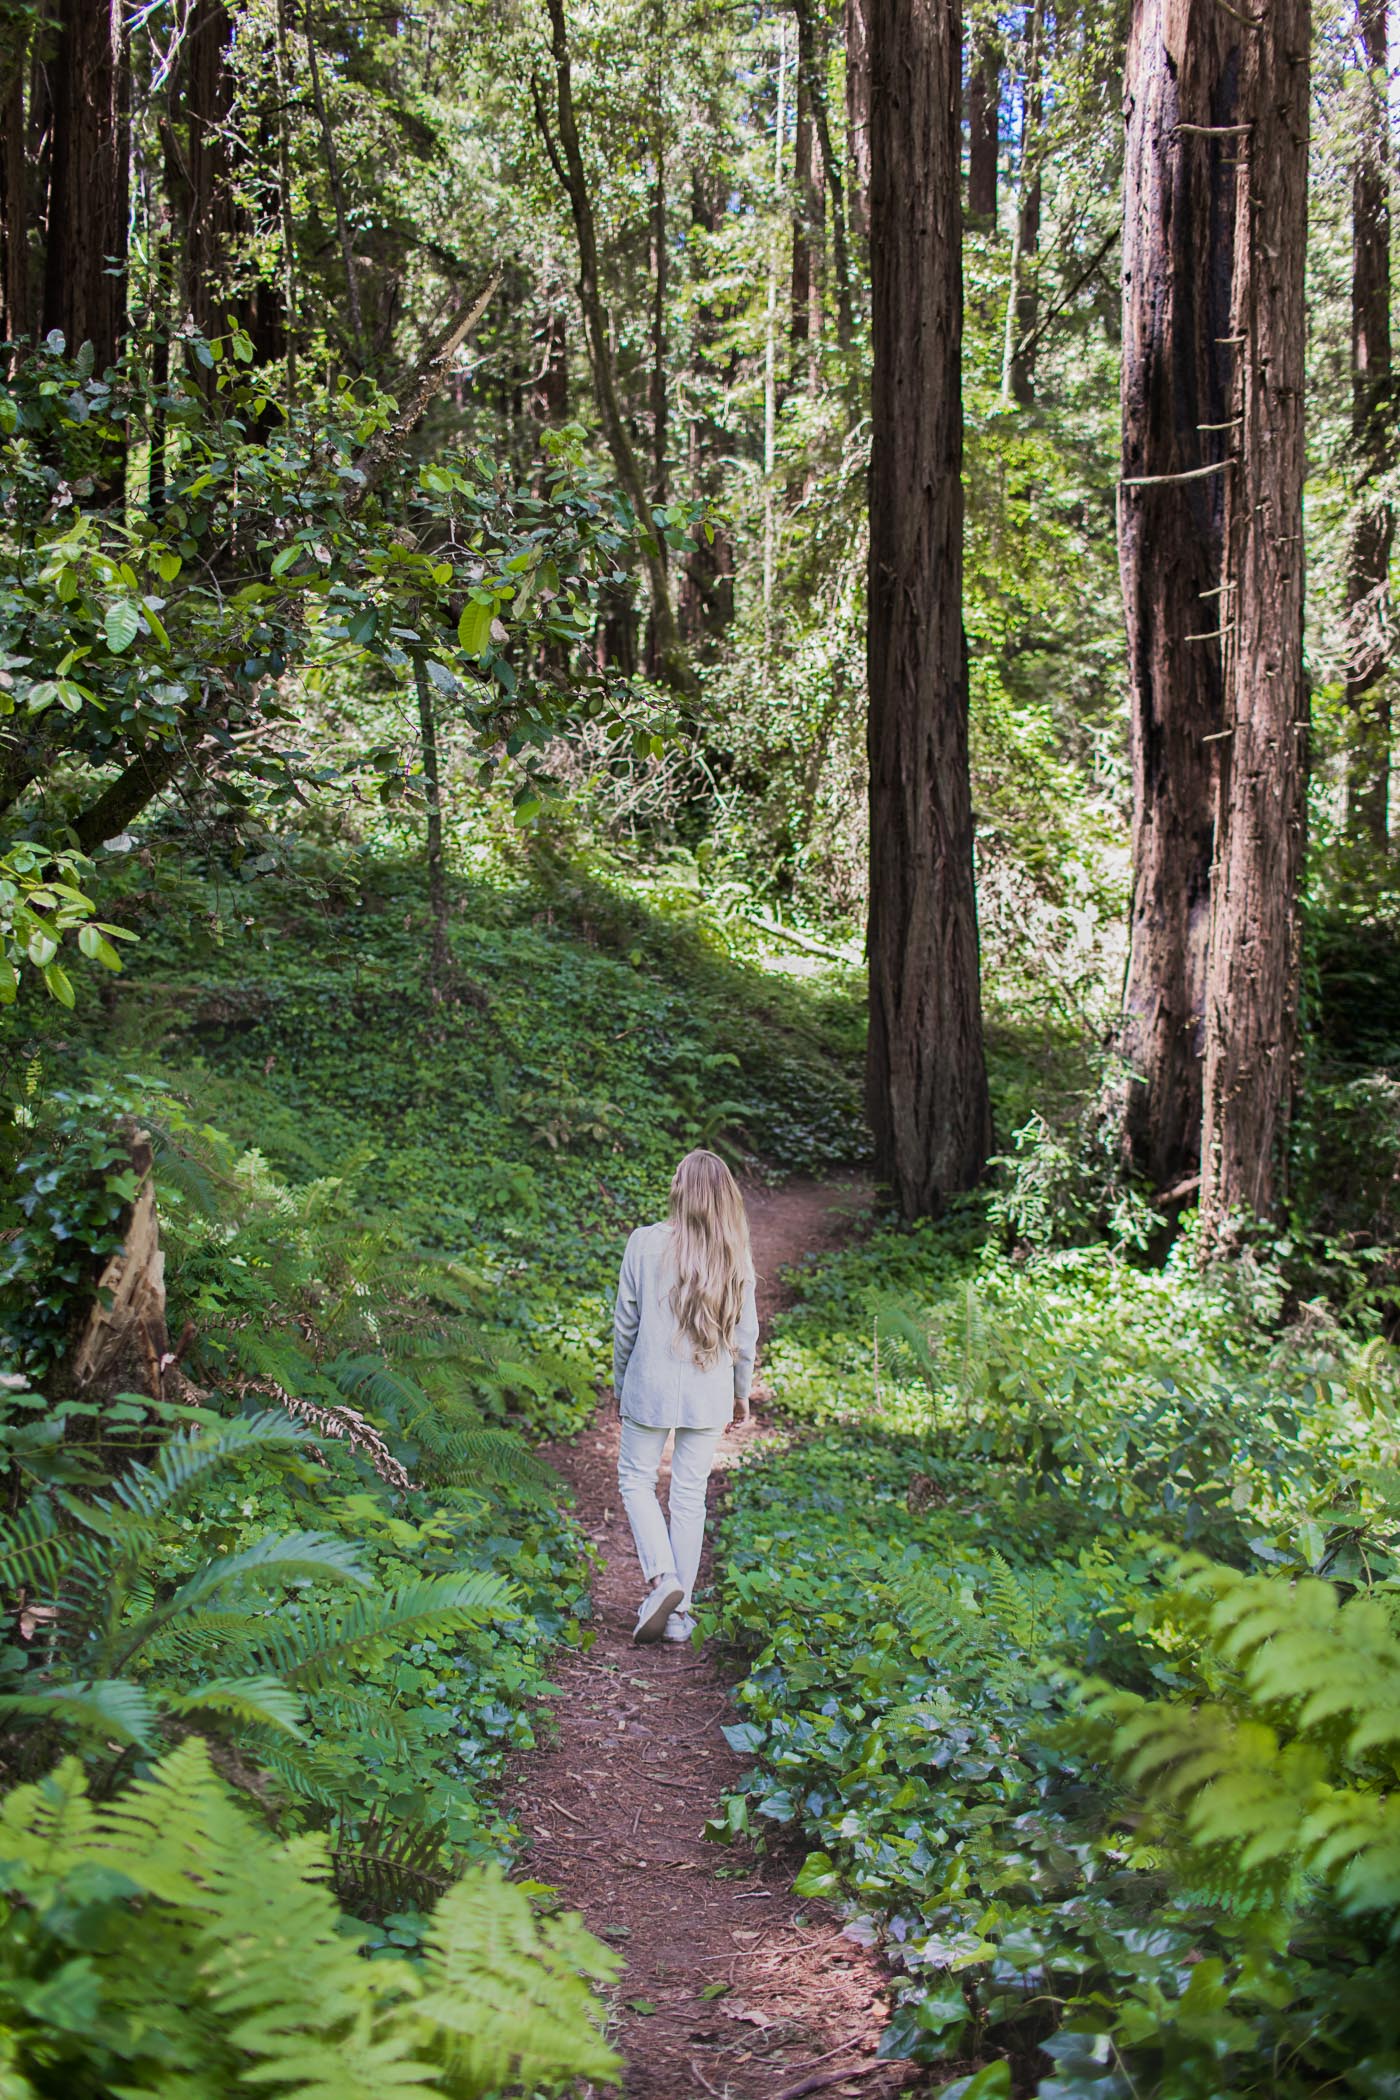 A Very Carmel Anniversary, hiking at the Forest of Nisene Marks during our romantic 36 hour getaway in Carmel, California. Includes my packing list, itinerary, and hotel review.